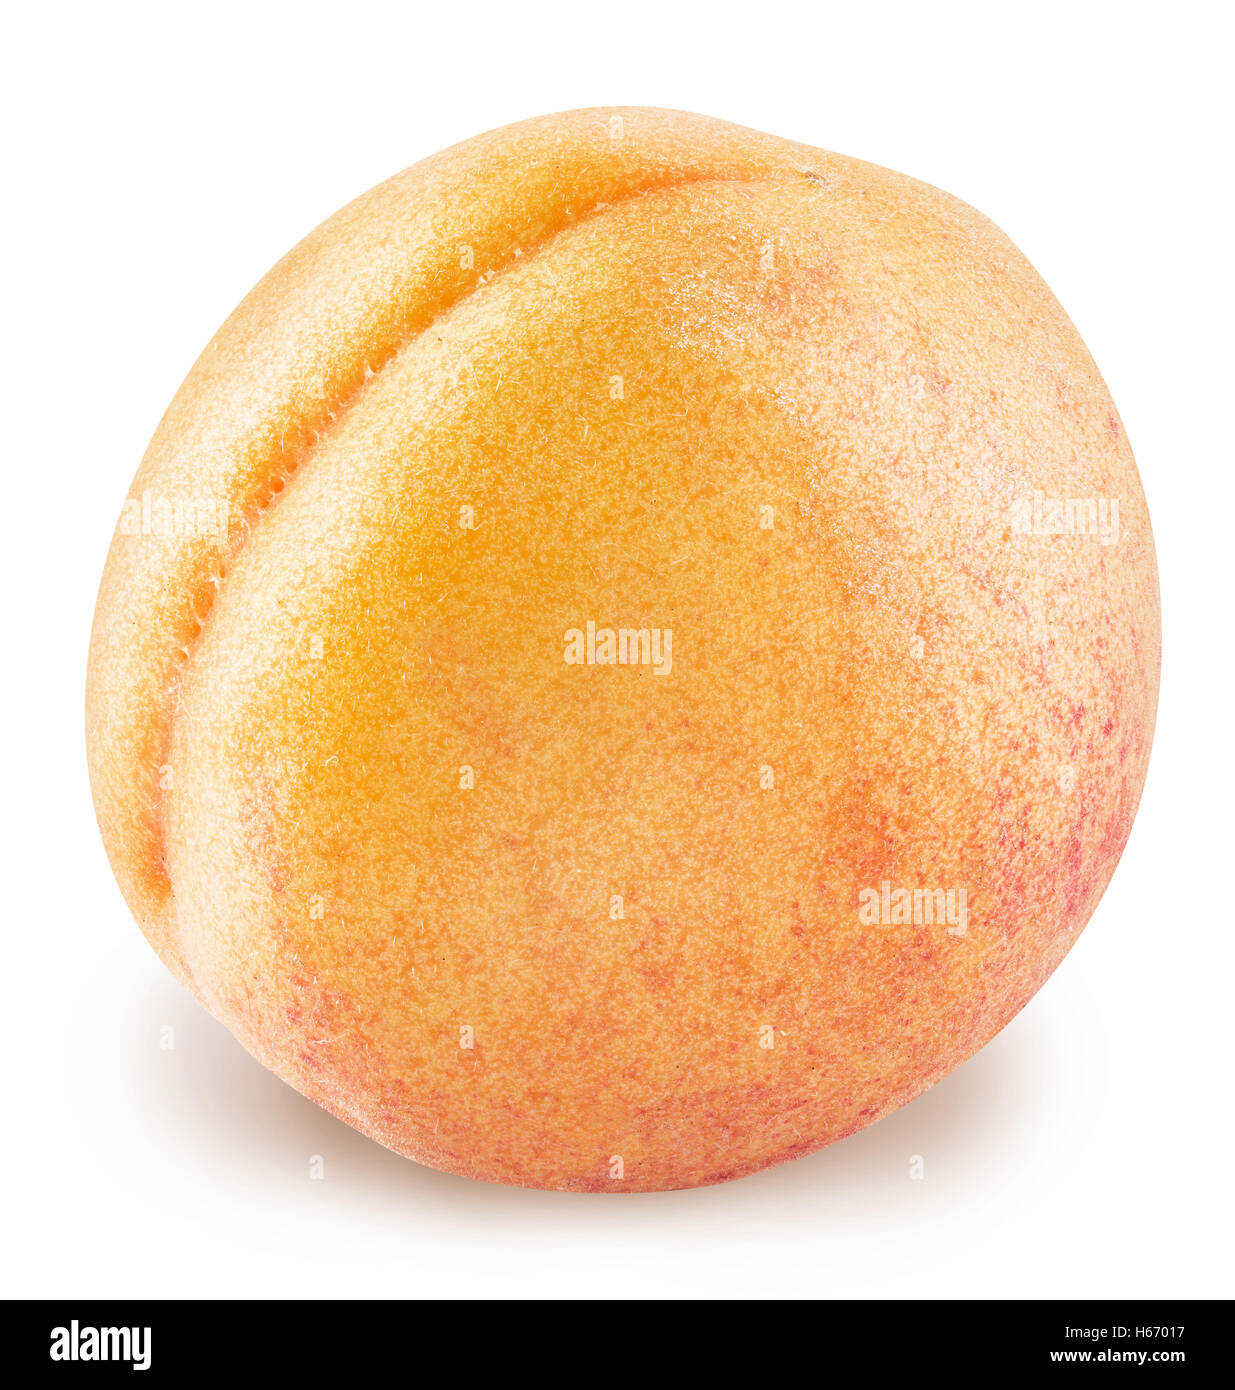 Ripe apricot fruit. Clipping paths. Stock Photo